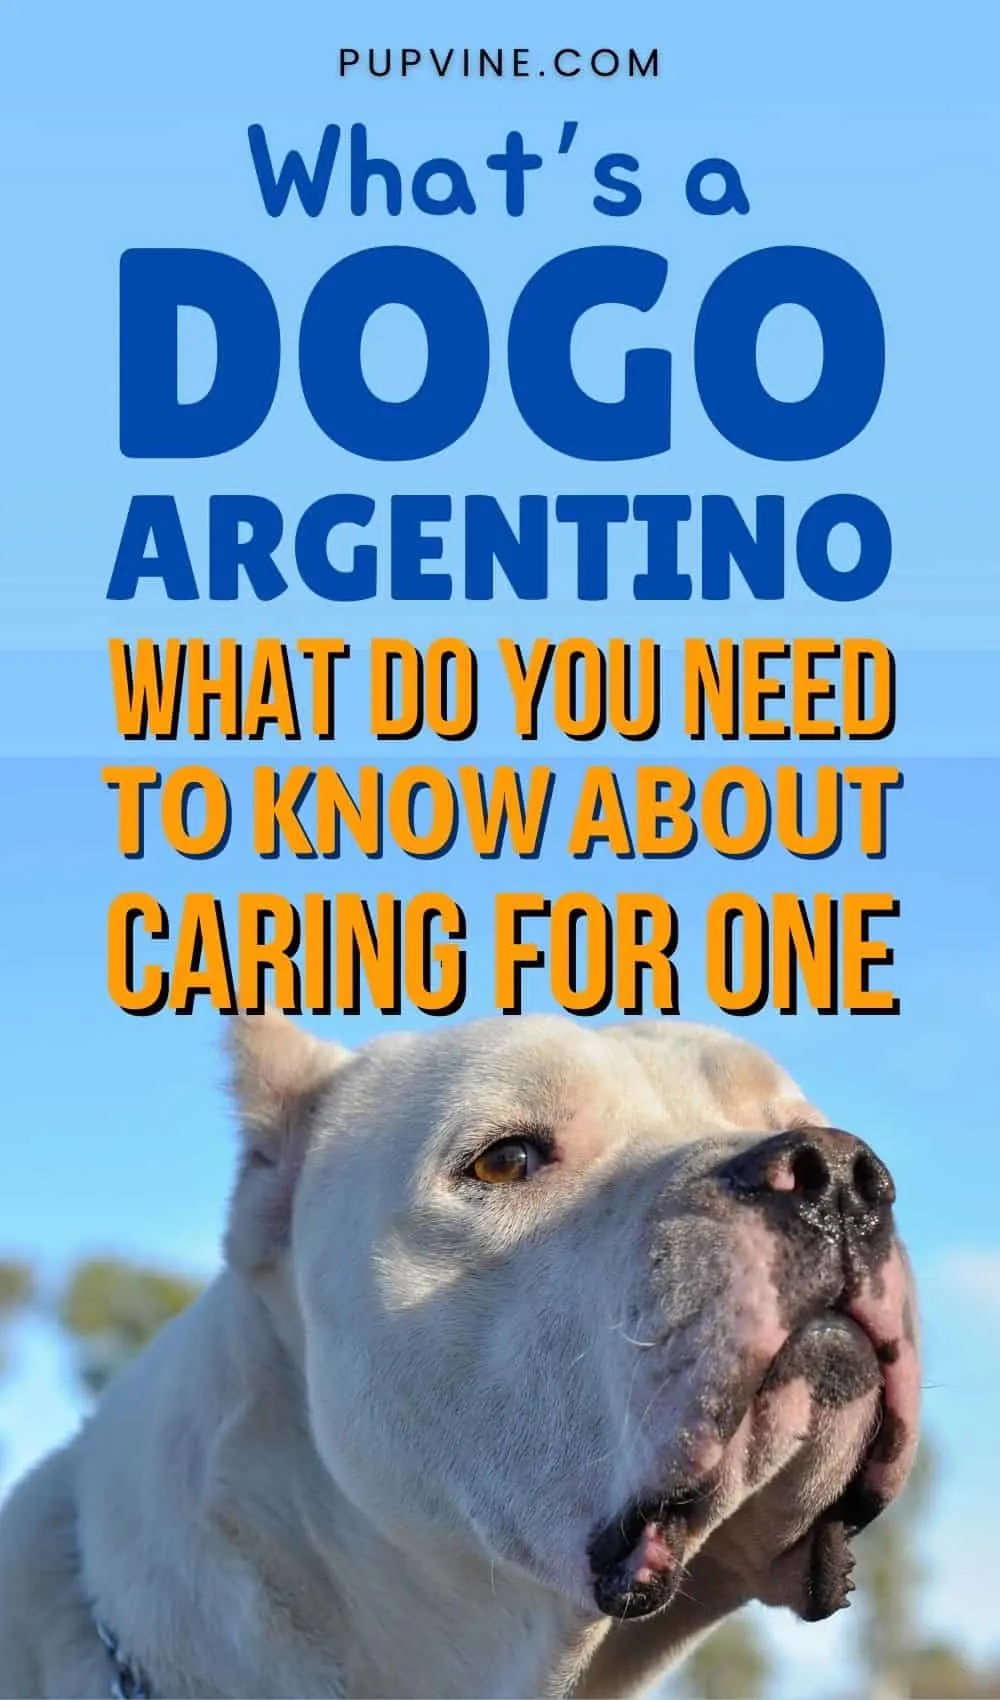 What’s A Dogo Argentino And What Do You Need To Know About Caring For One